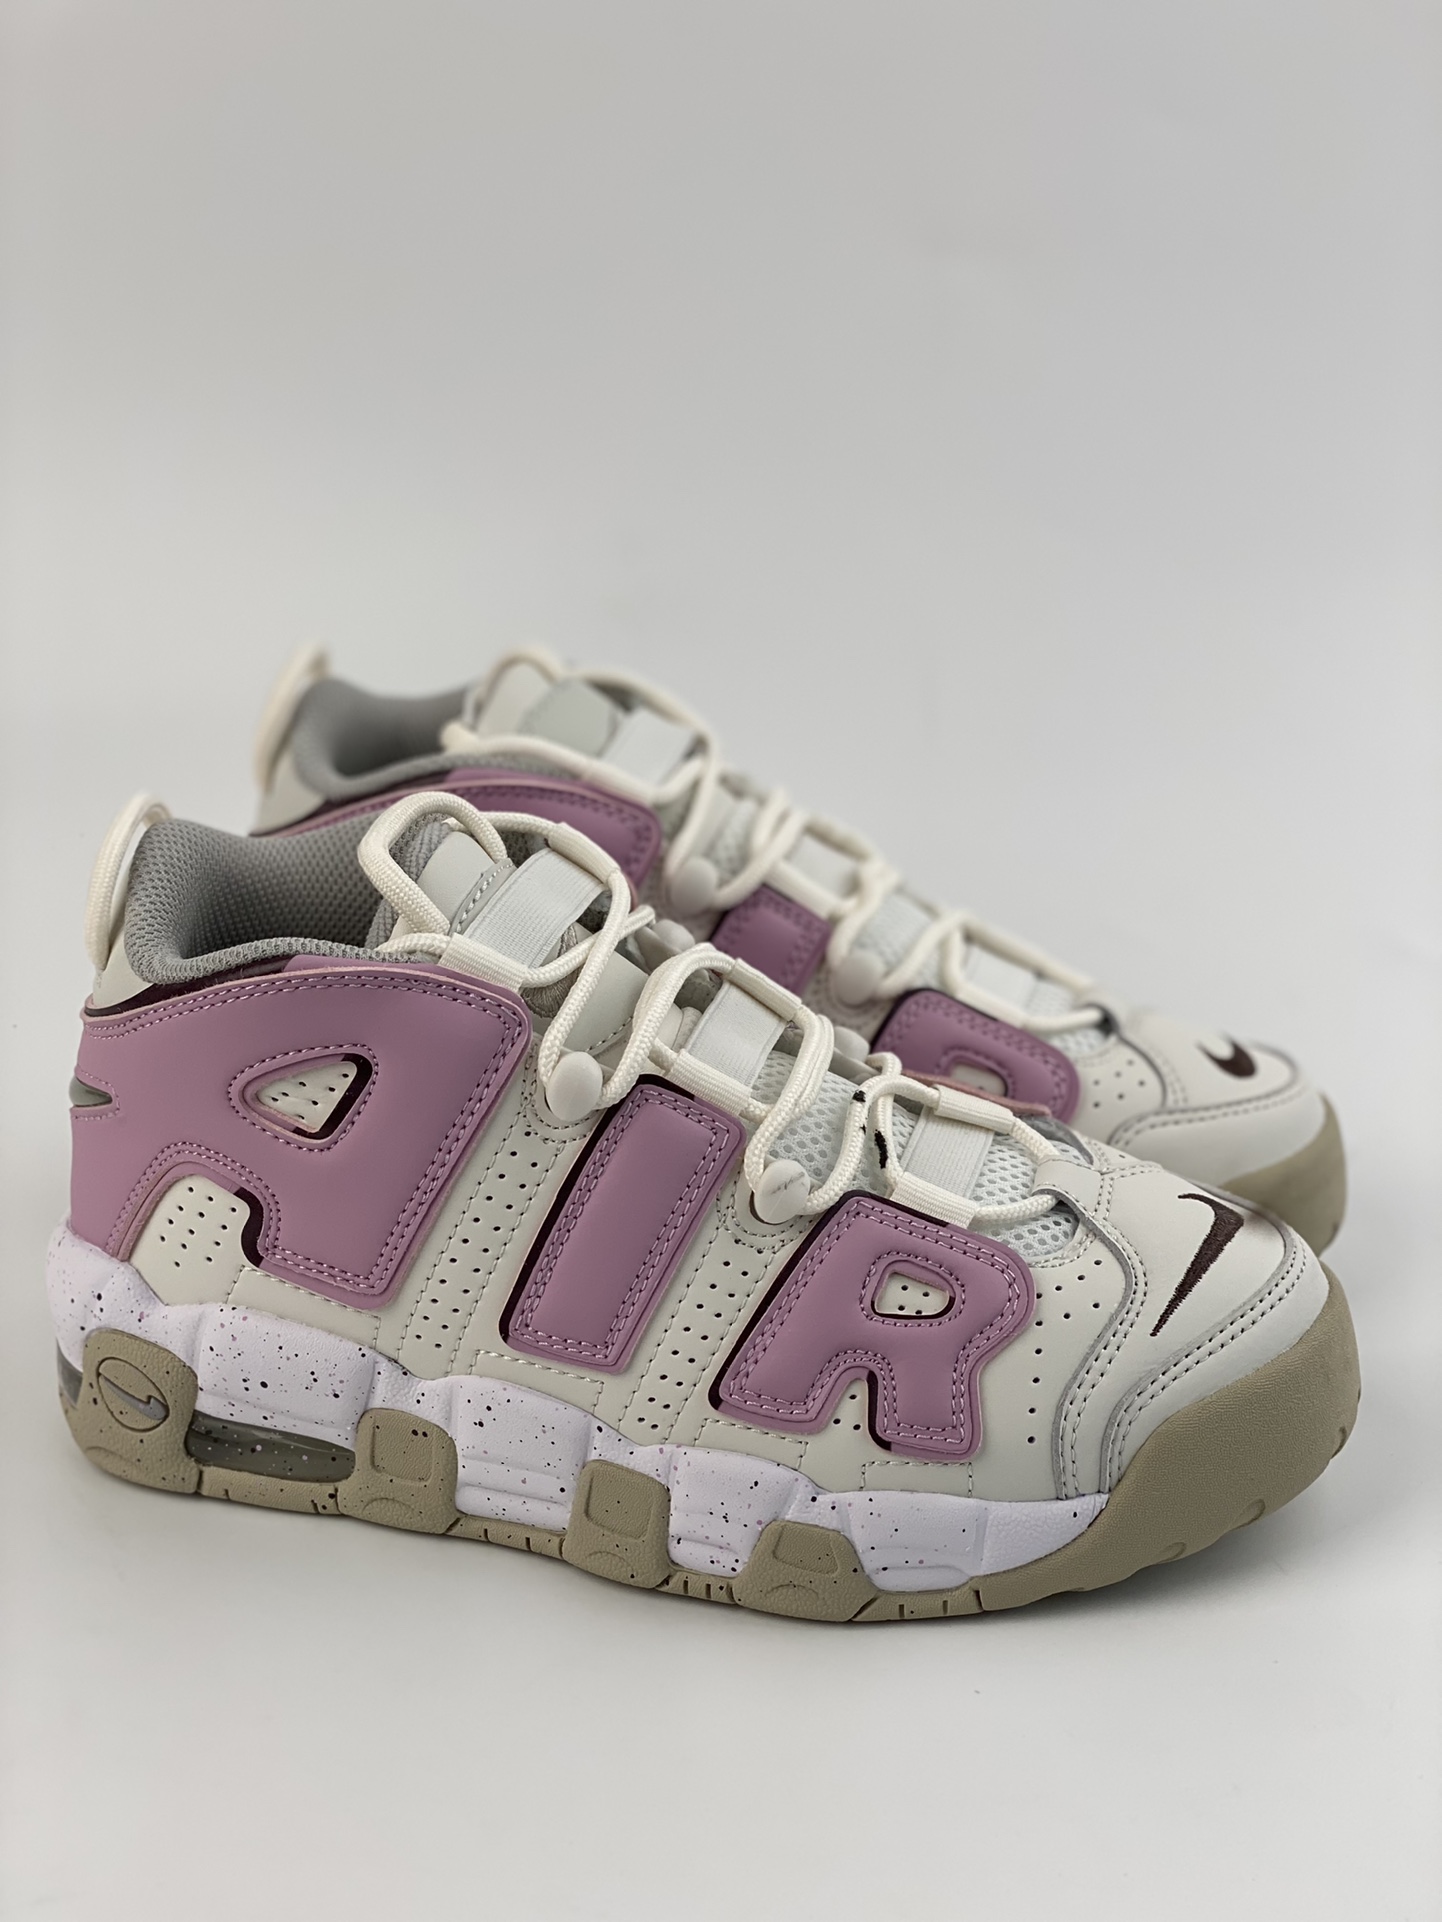 Air More Uptempo Sweet Wine Cherry Valentine's Day represents the highest version of Pippen in history DM1023-001